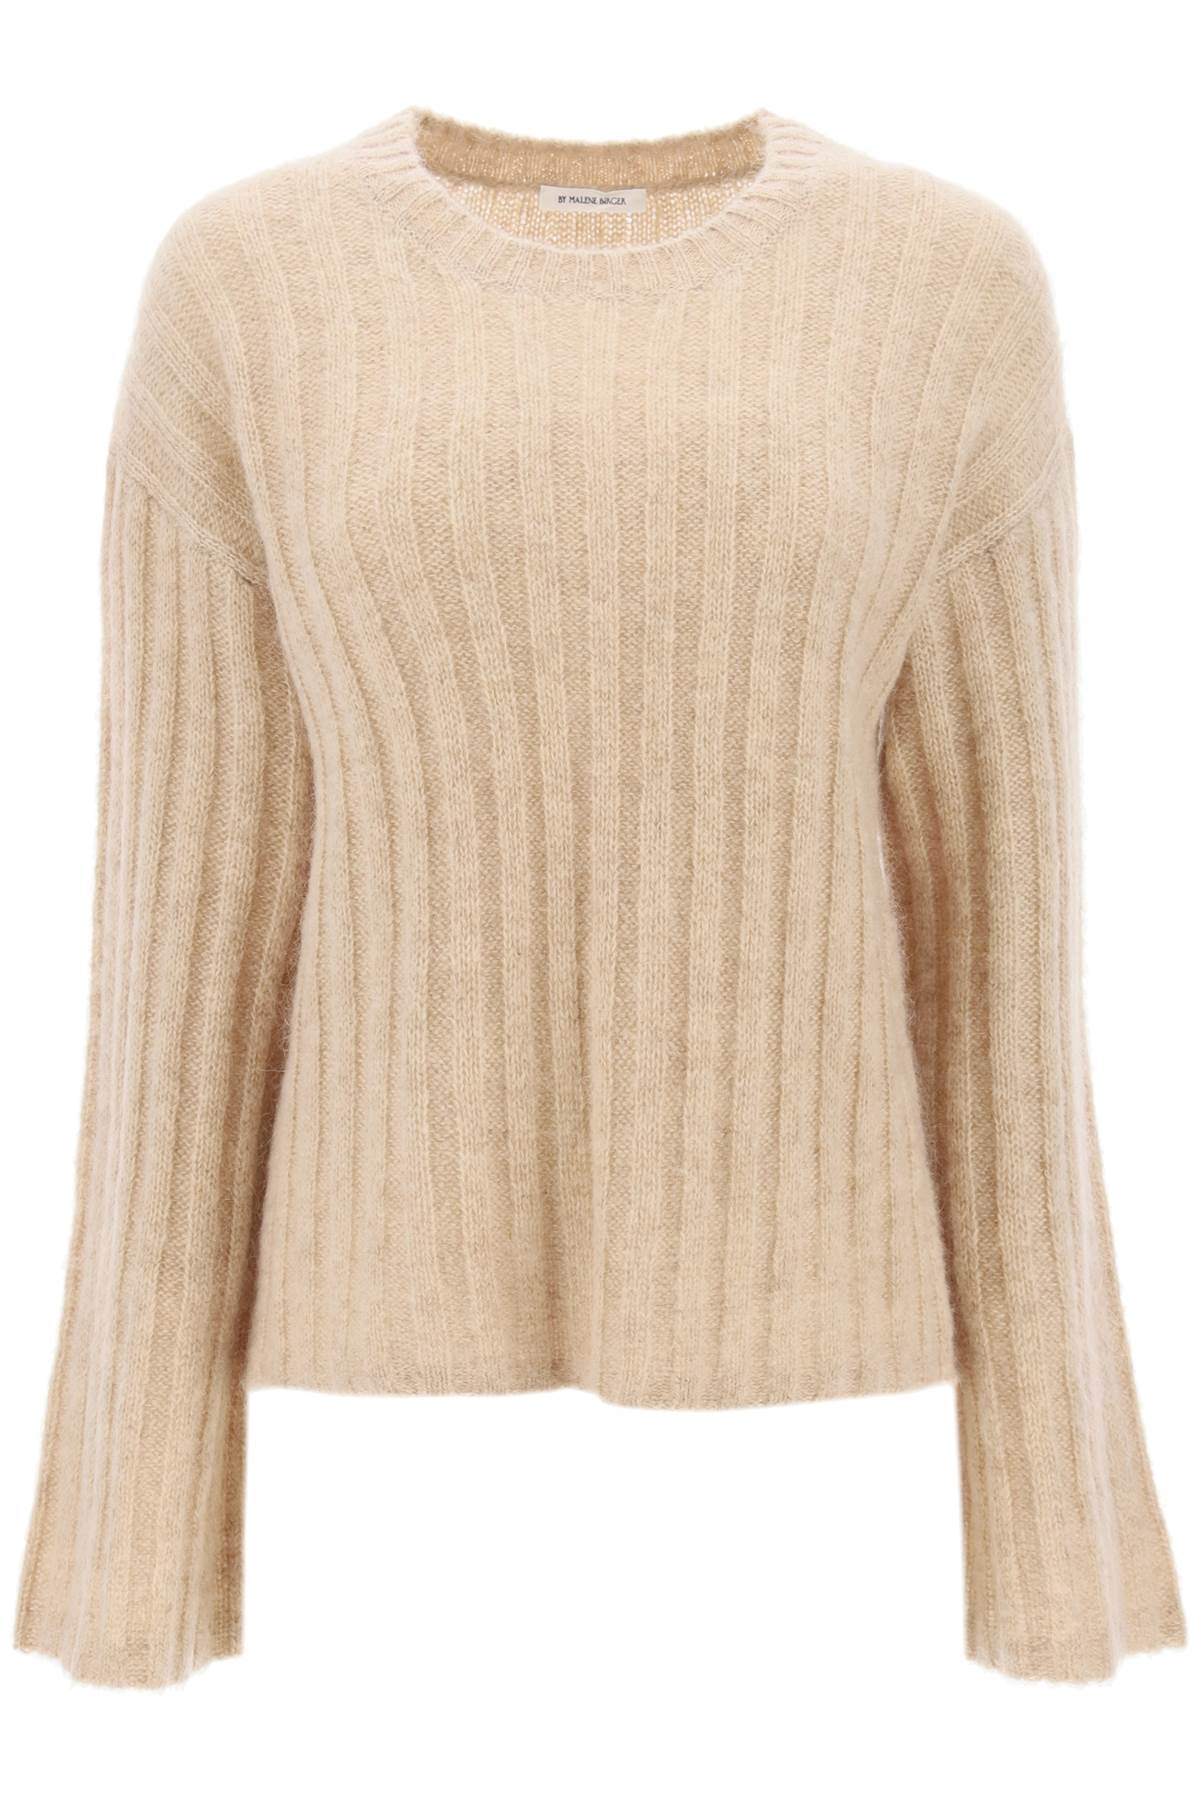 By Malene Birger Ribbed Knit Pullover Sweater   Beige